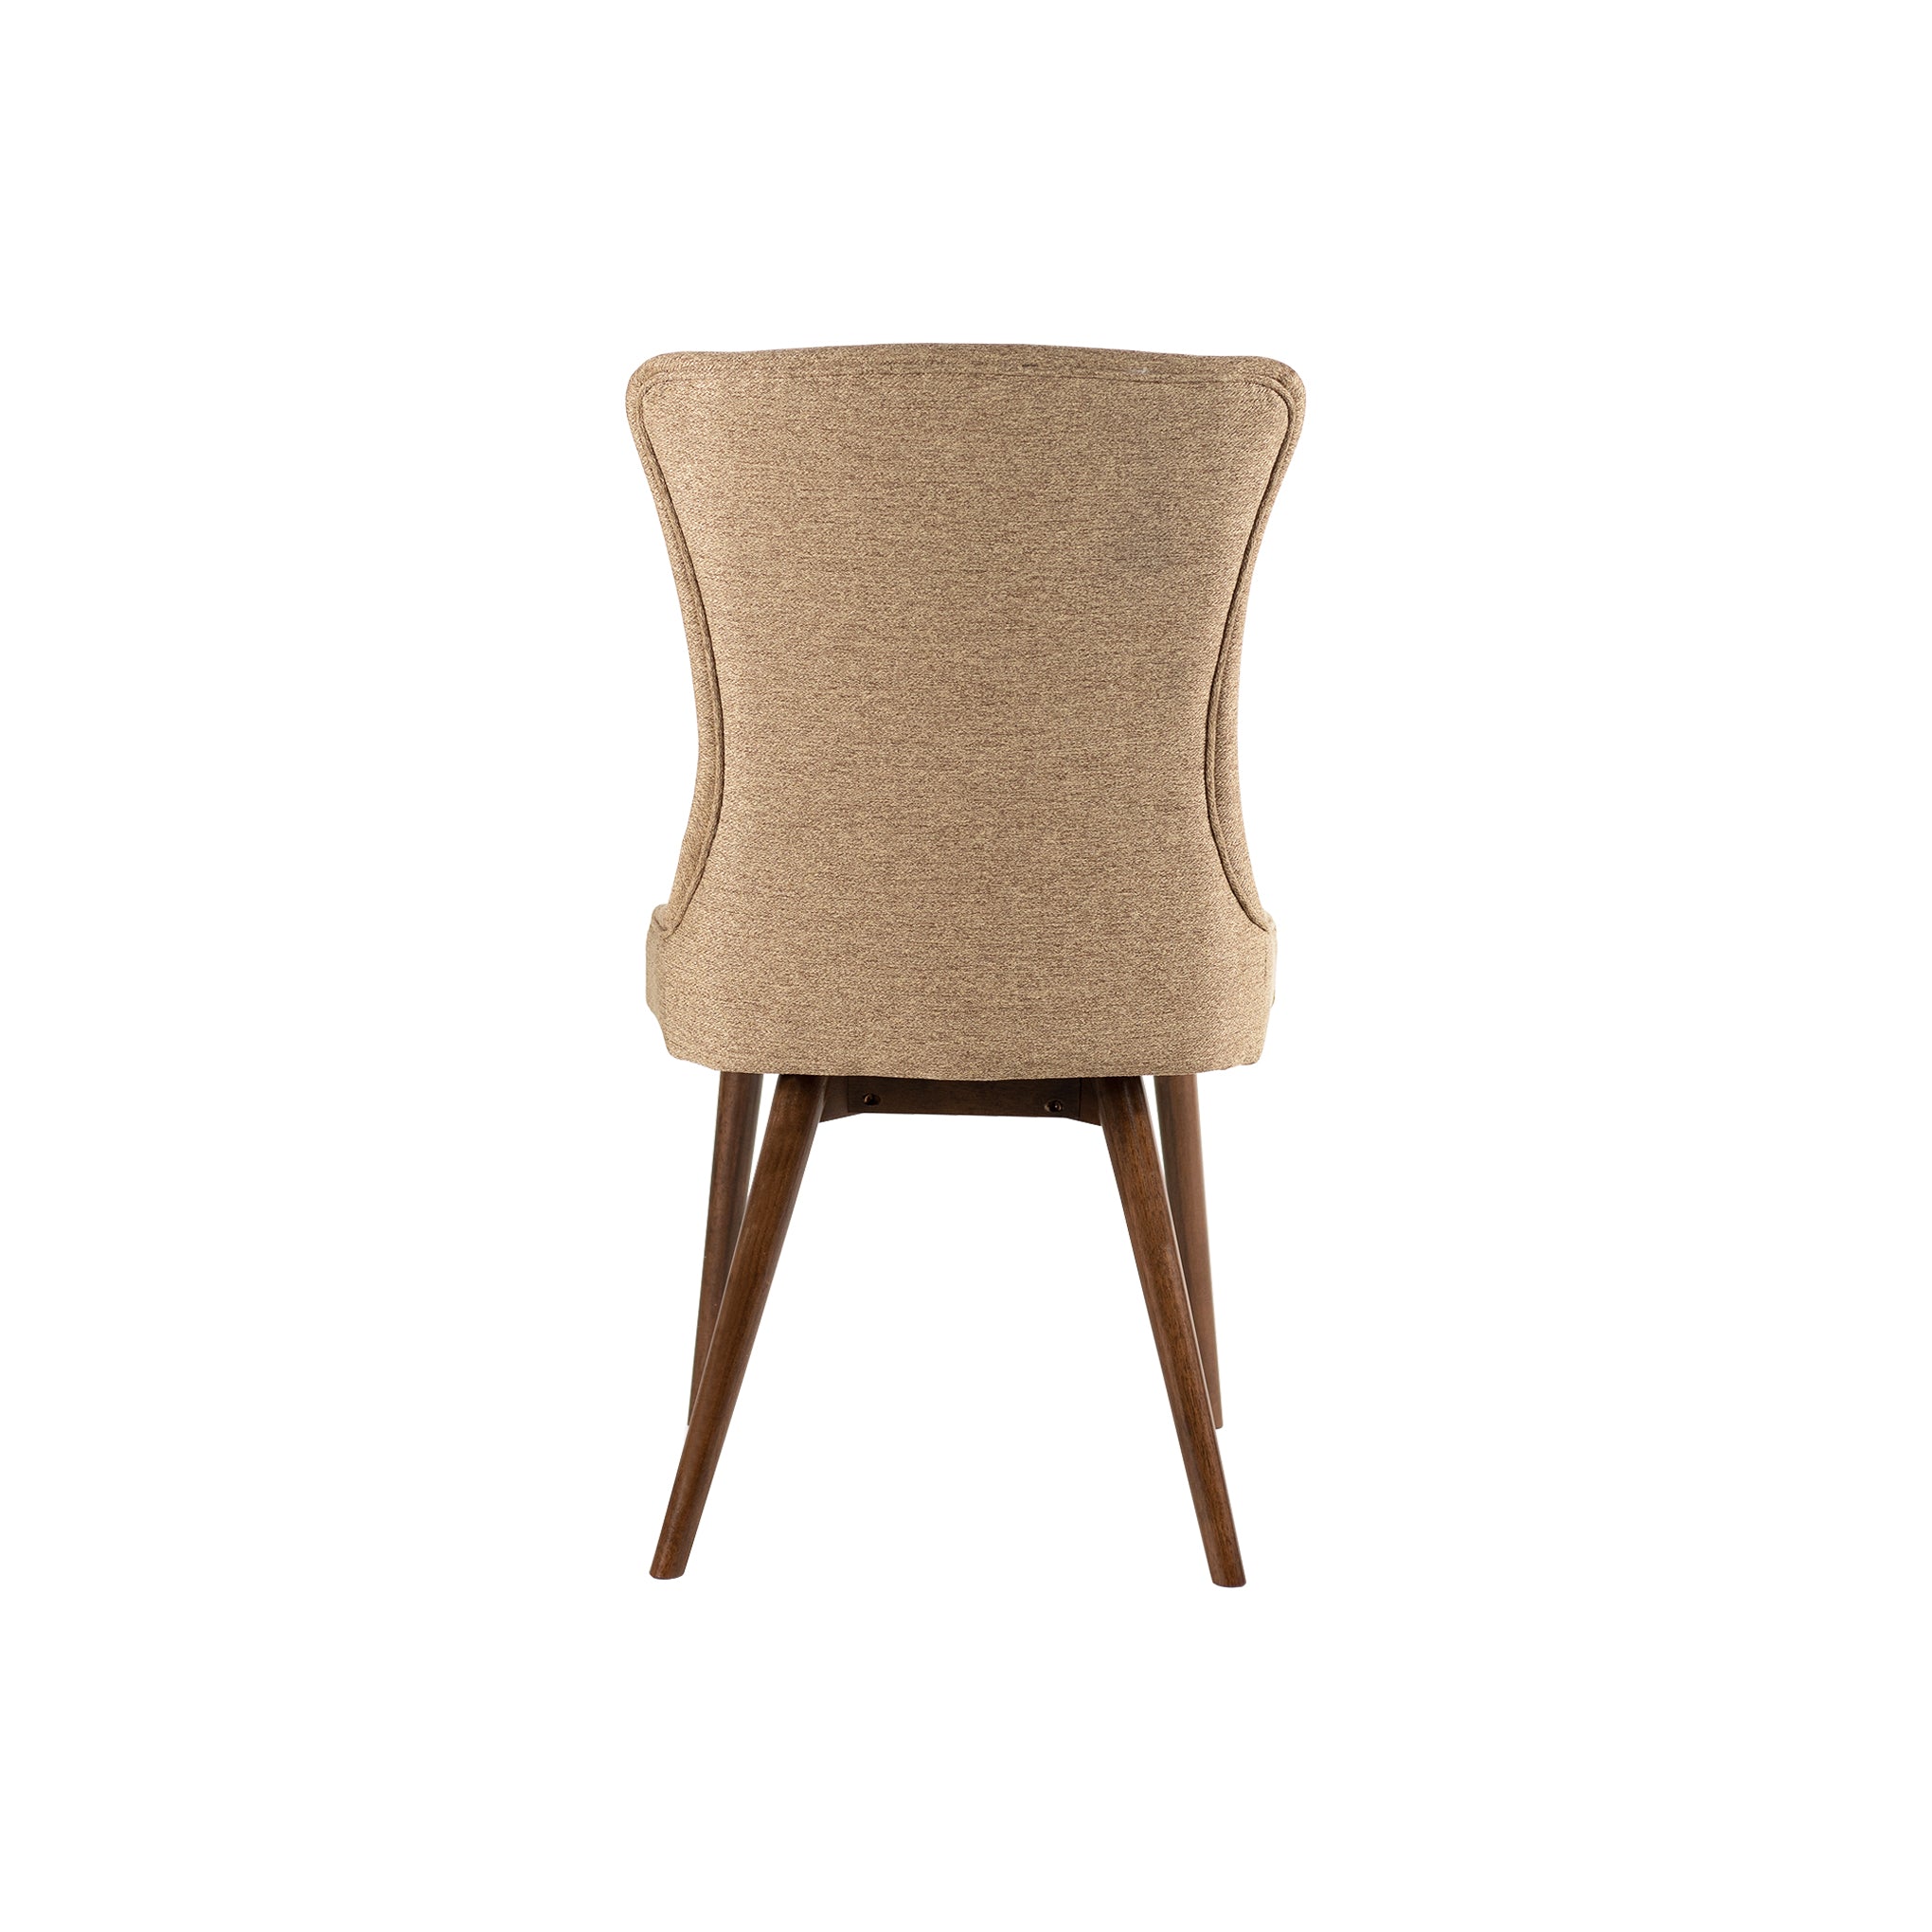 Selma Dining Chair With Cushion Seat